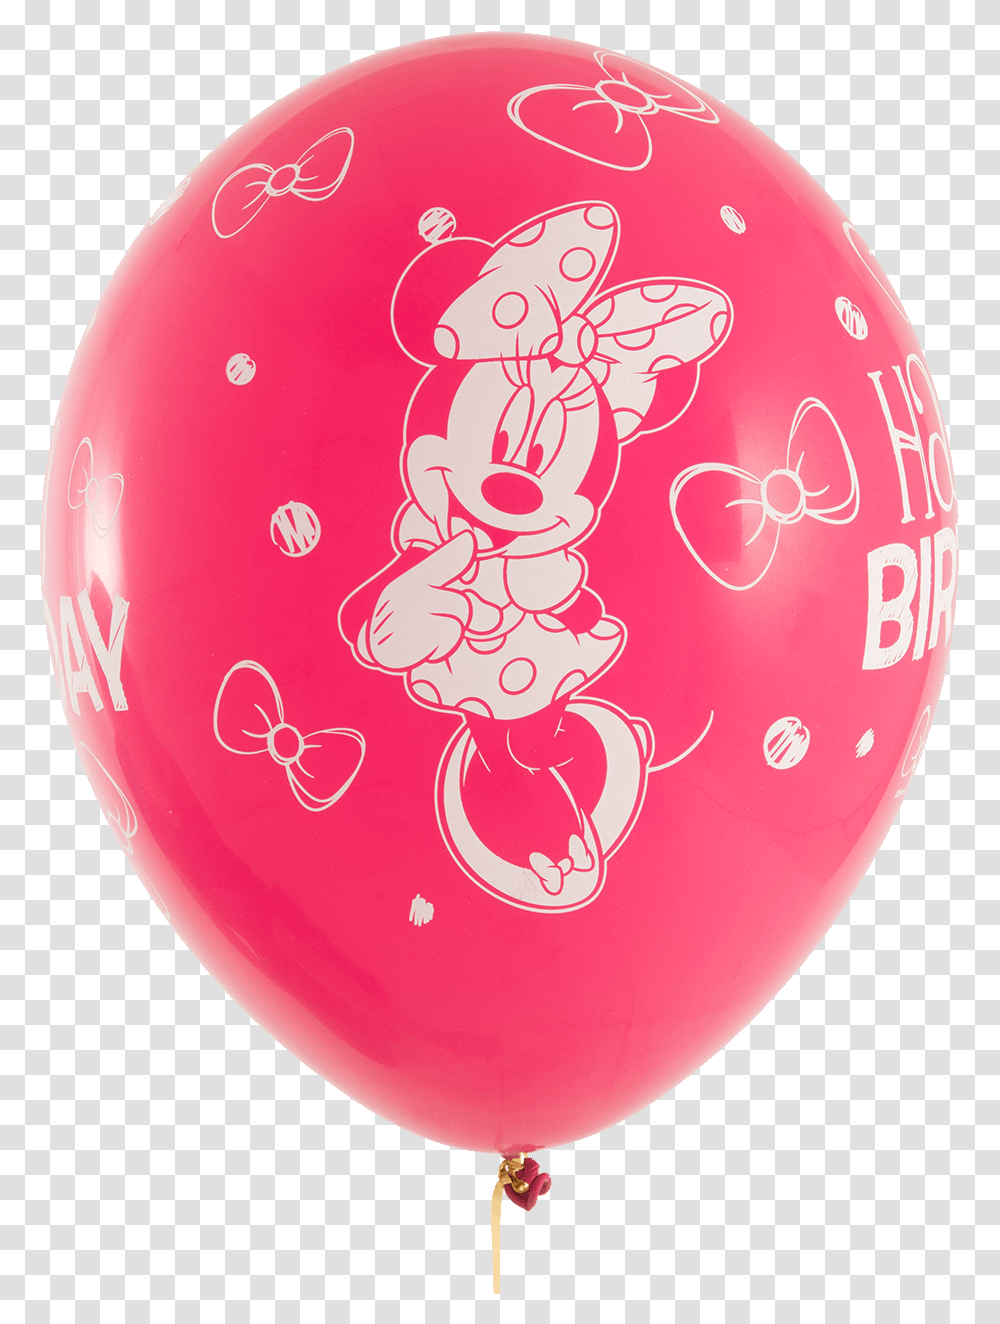 Greeting Cards Amp Party Supply Disney Minnie Mickey Minnie Mouse Gem Balloons, Logo, Trademark, Sphere Transparent Png